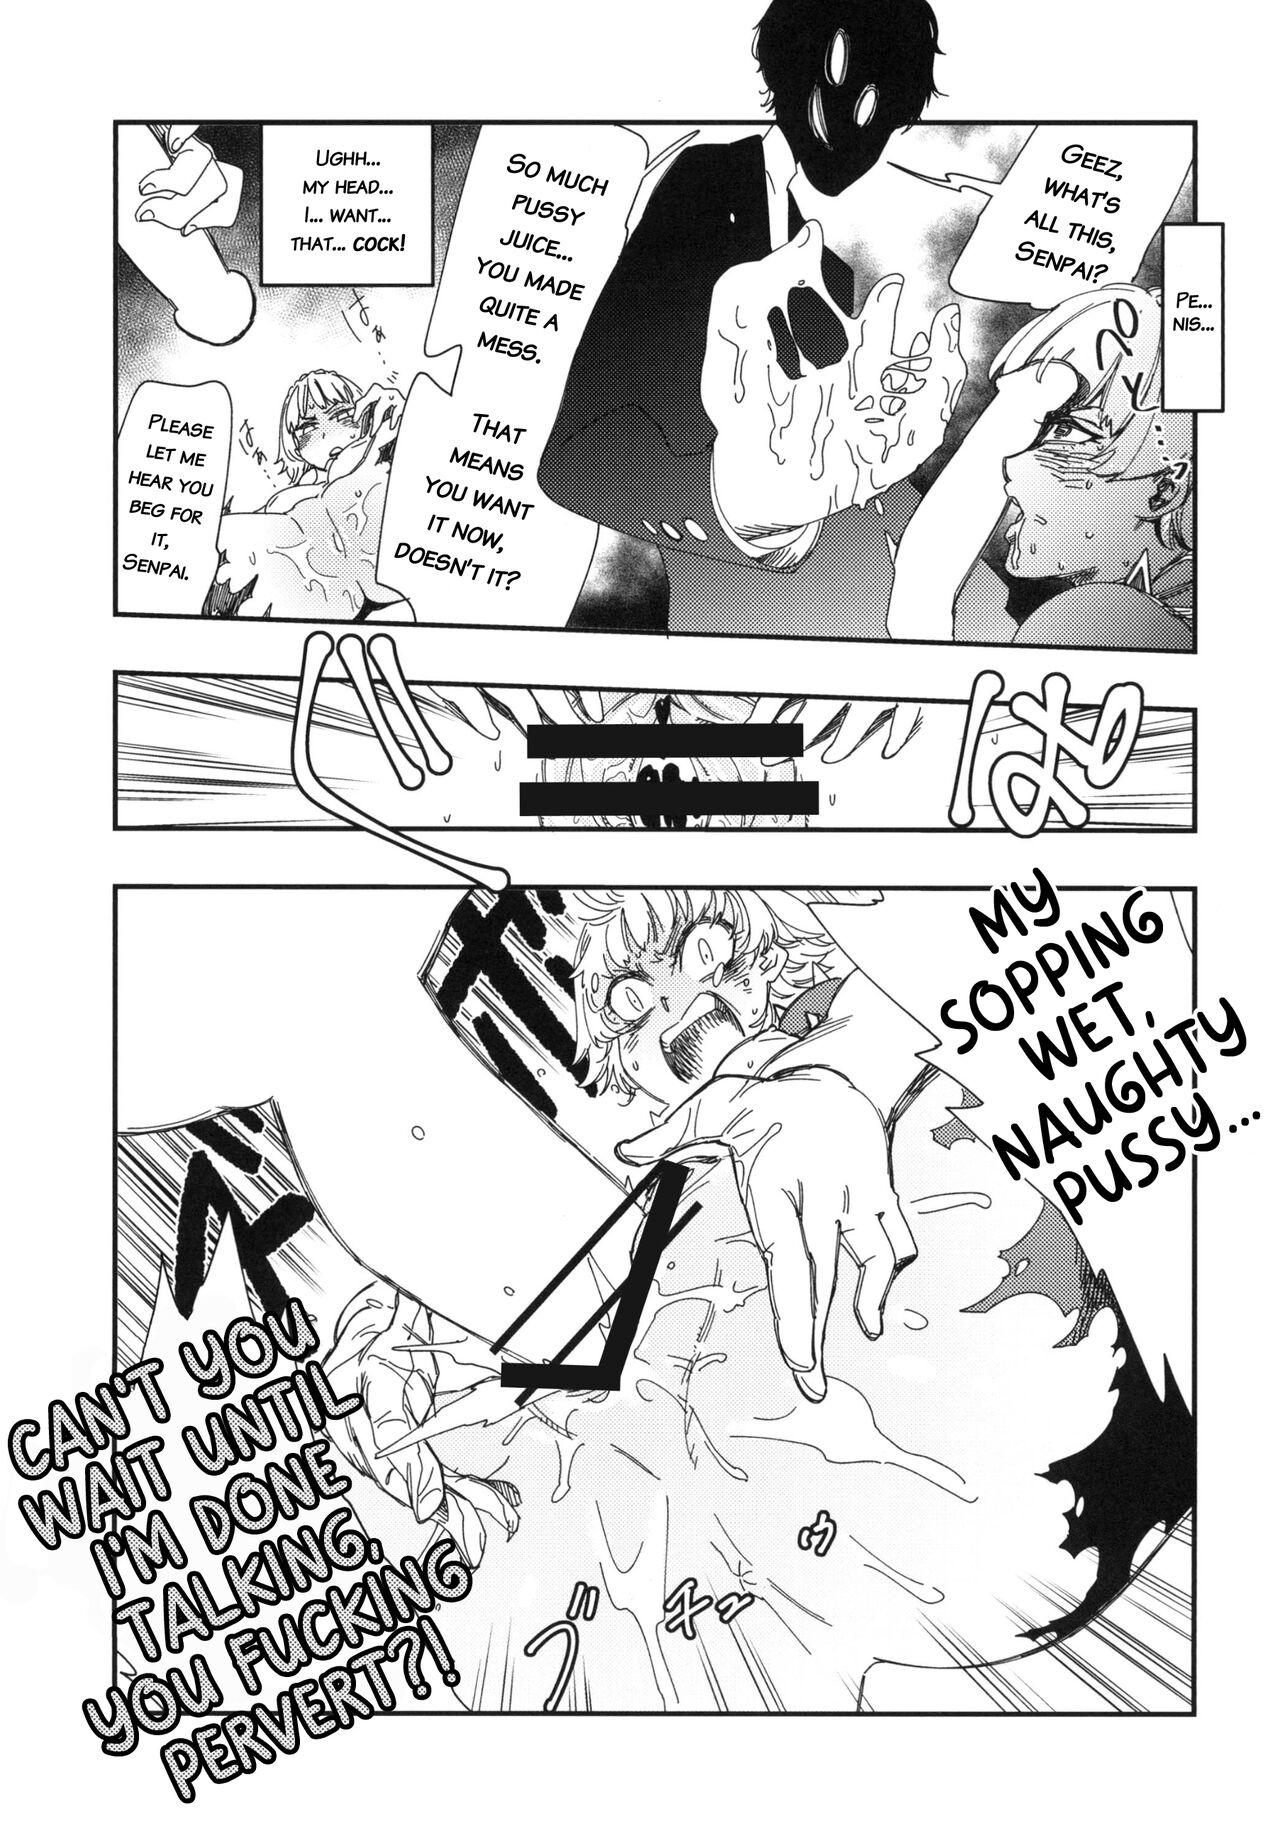 Girl COFFEE & SPAM - Persona 5 Thong - Page 11